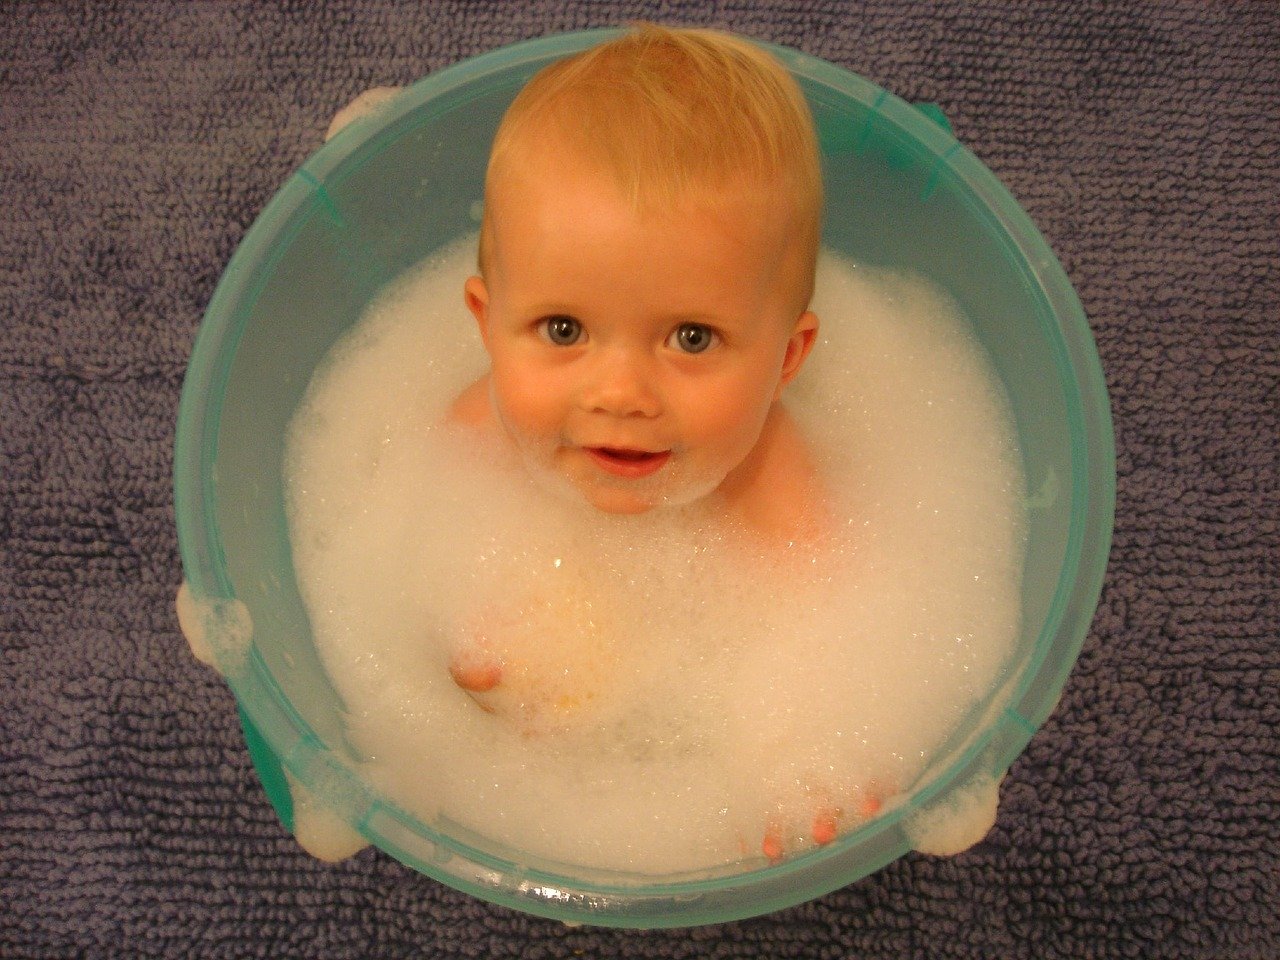 baby-in-a-bucket-water-quality.jpg